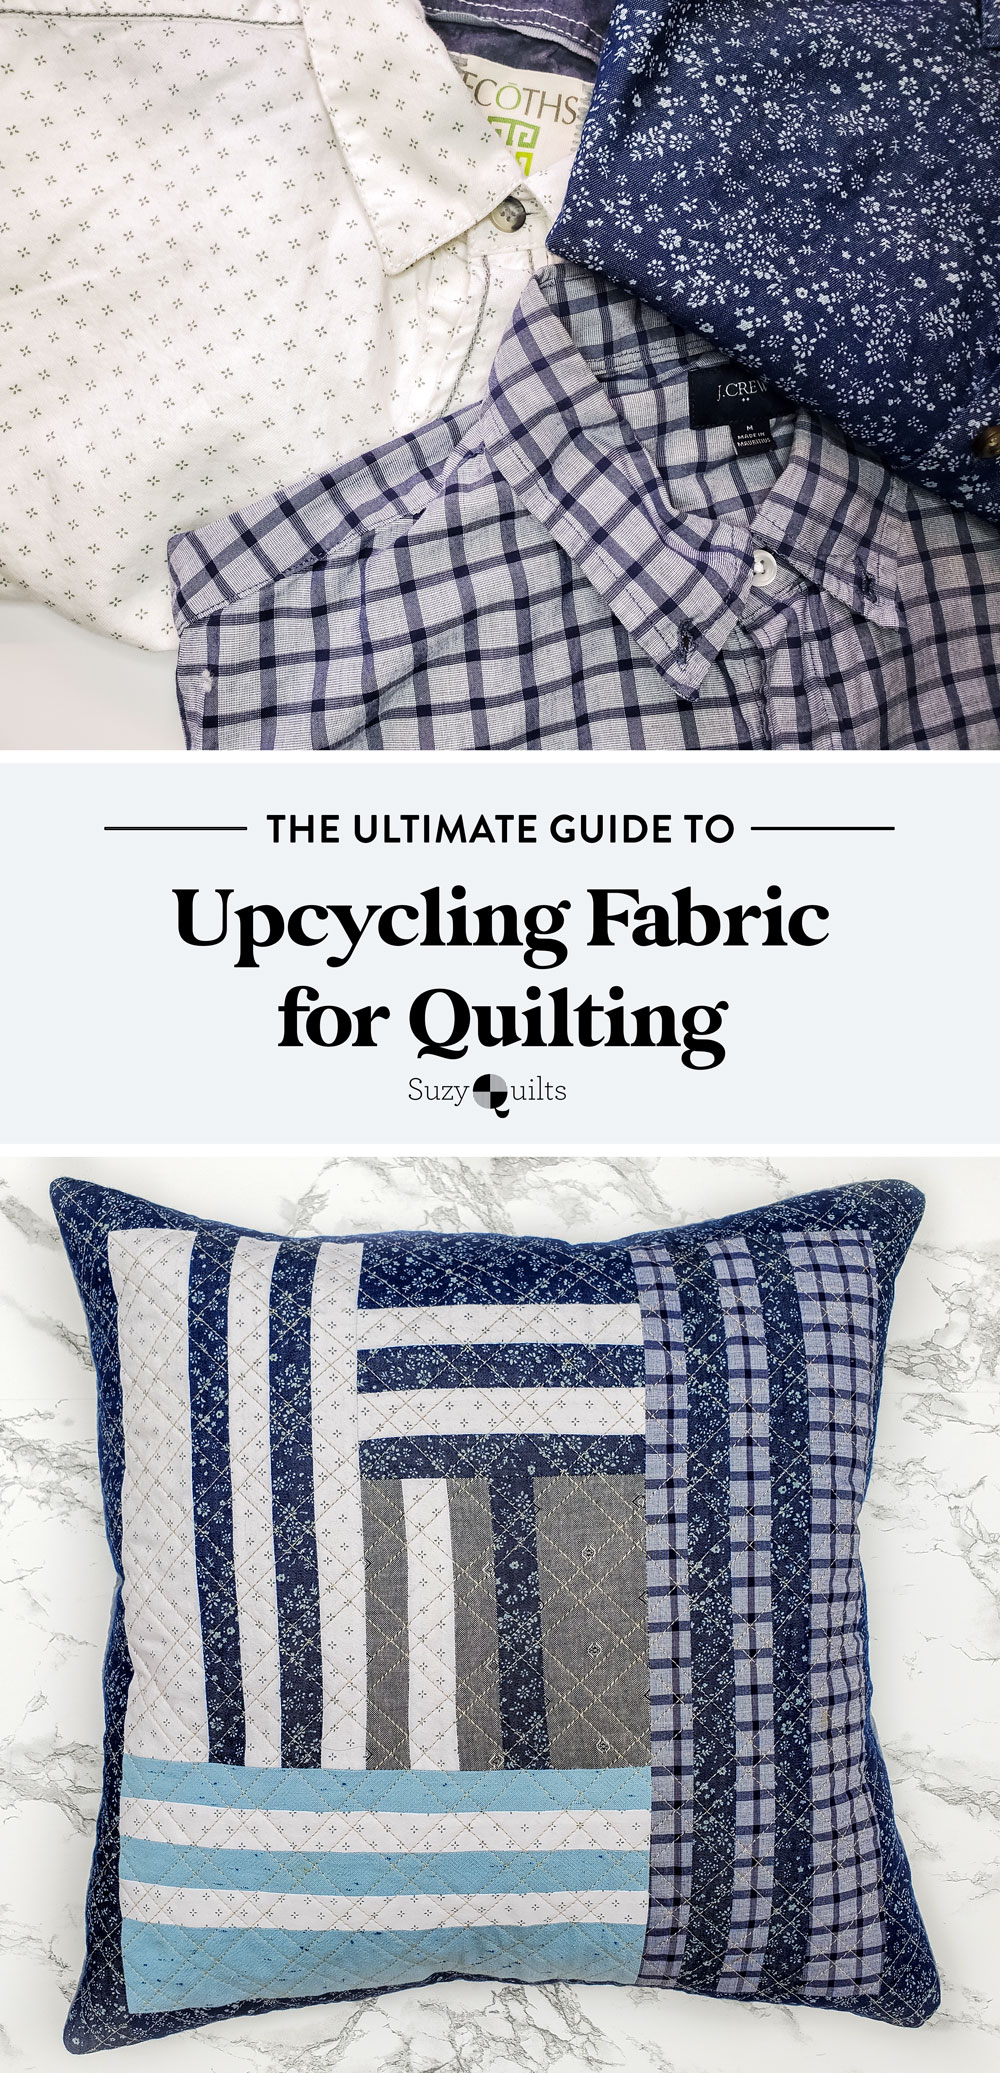 Your ultimate guide to upcycling fabric for quilting! From memory quilts to simply saving money, upcycling used fabric is a wonderful thing to do! suzyquilts.com #fabric #quilting